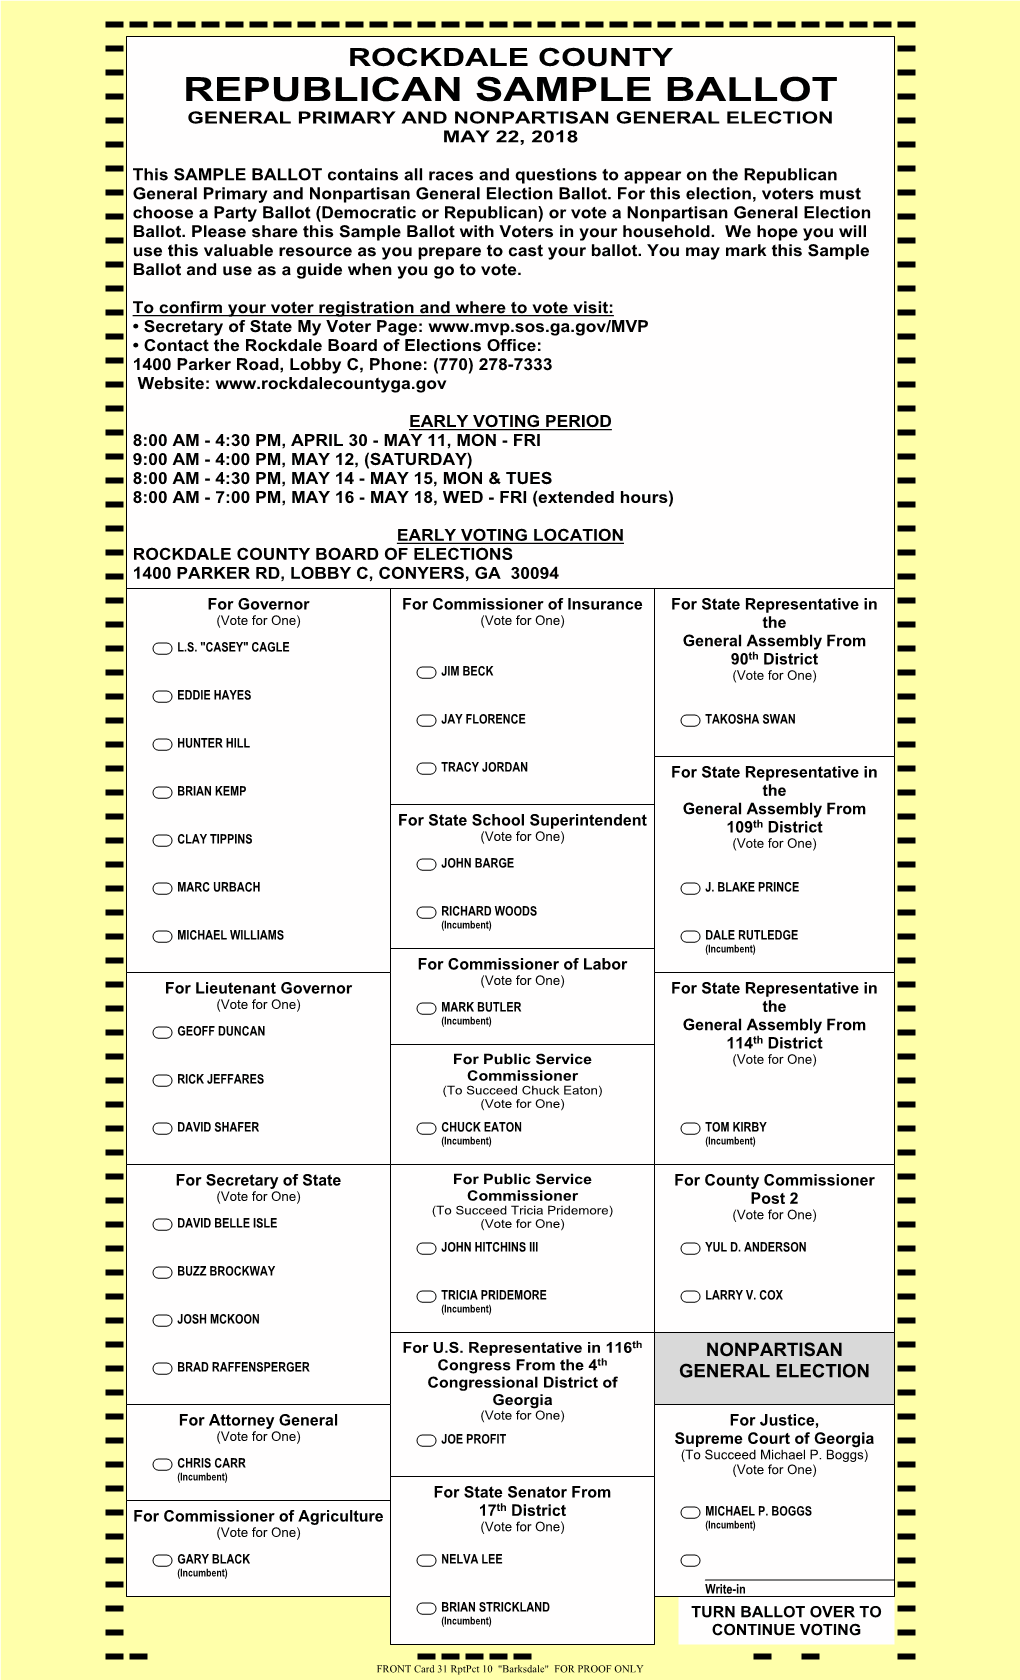 Republican Sample Ballot General Primary and Nonpartisan General Election May 22, 2018